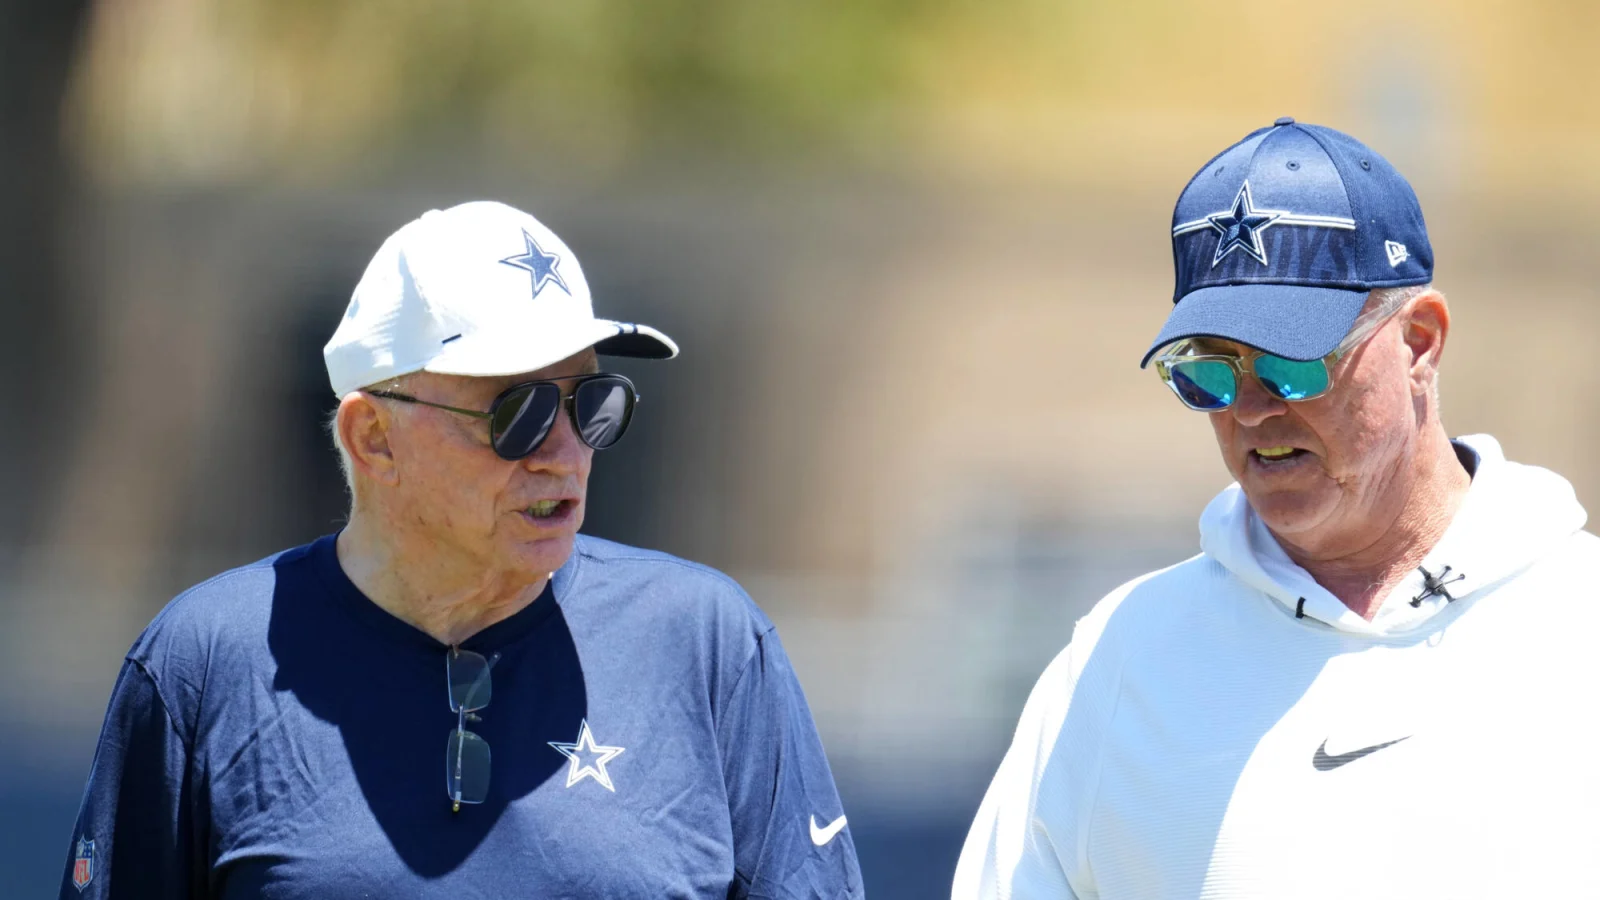 Why Cowboys Fans Are Upset: Inside Look at the Team's Quiet Offseason and Big Promises